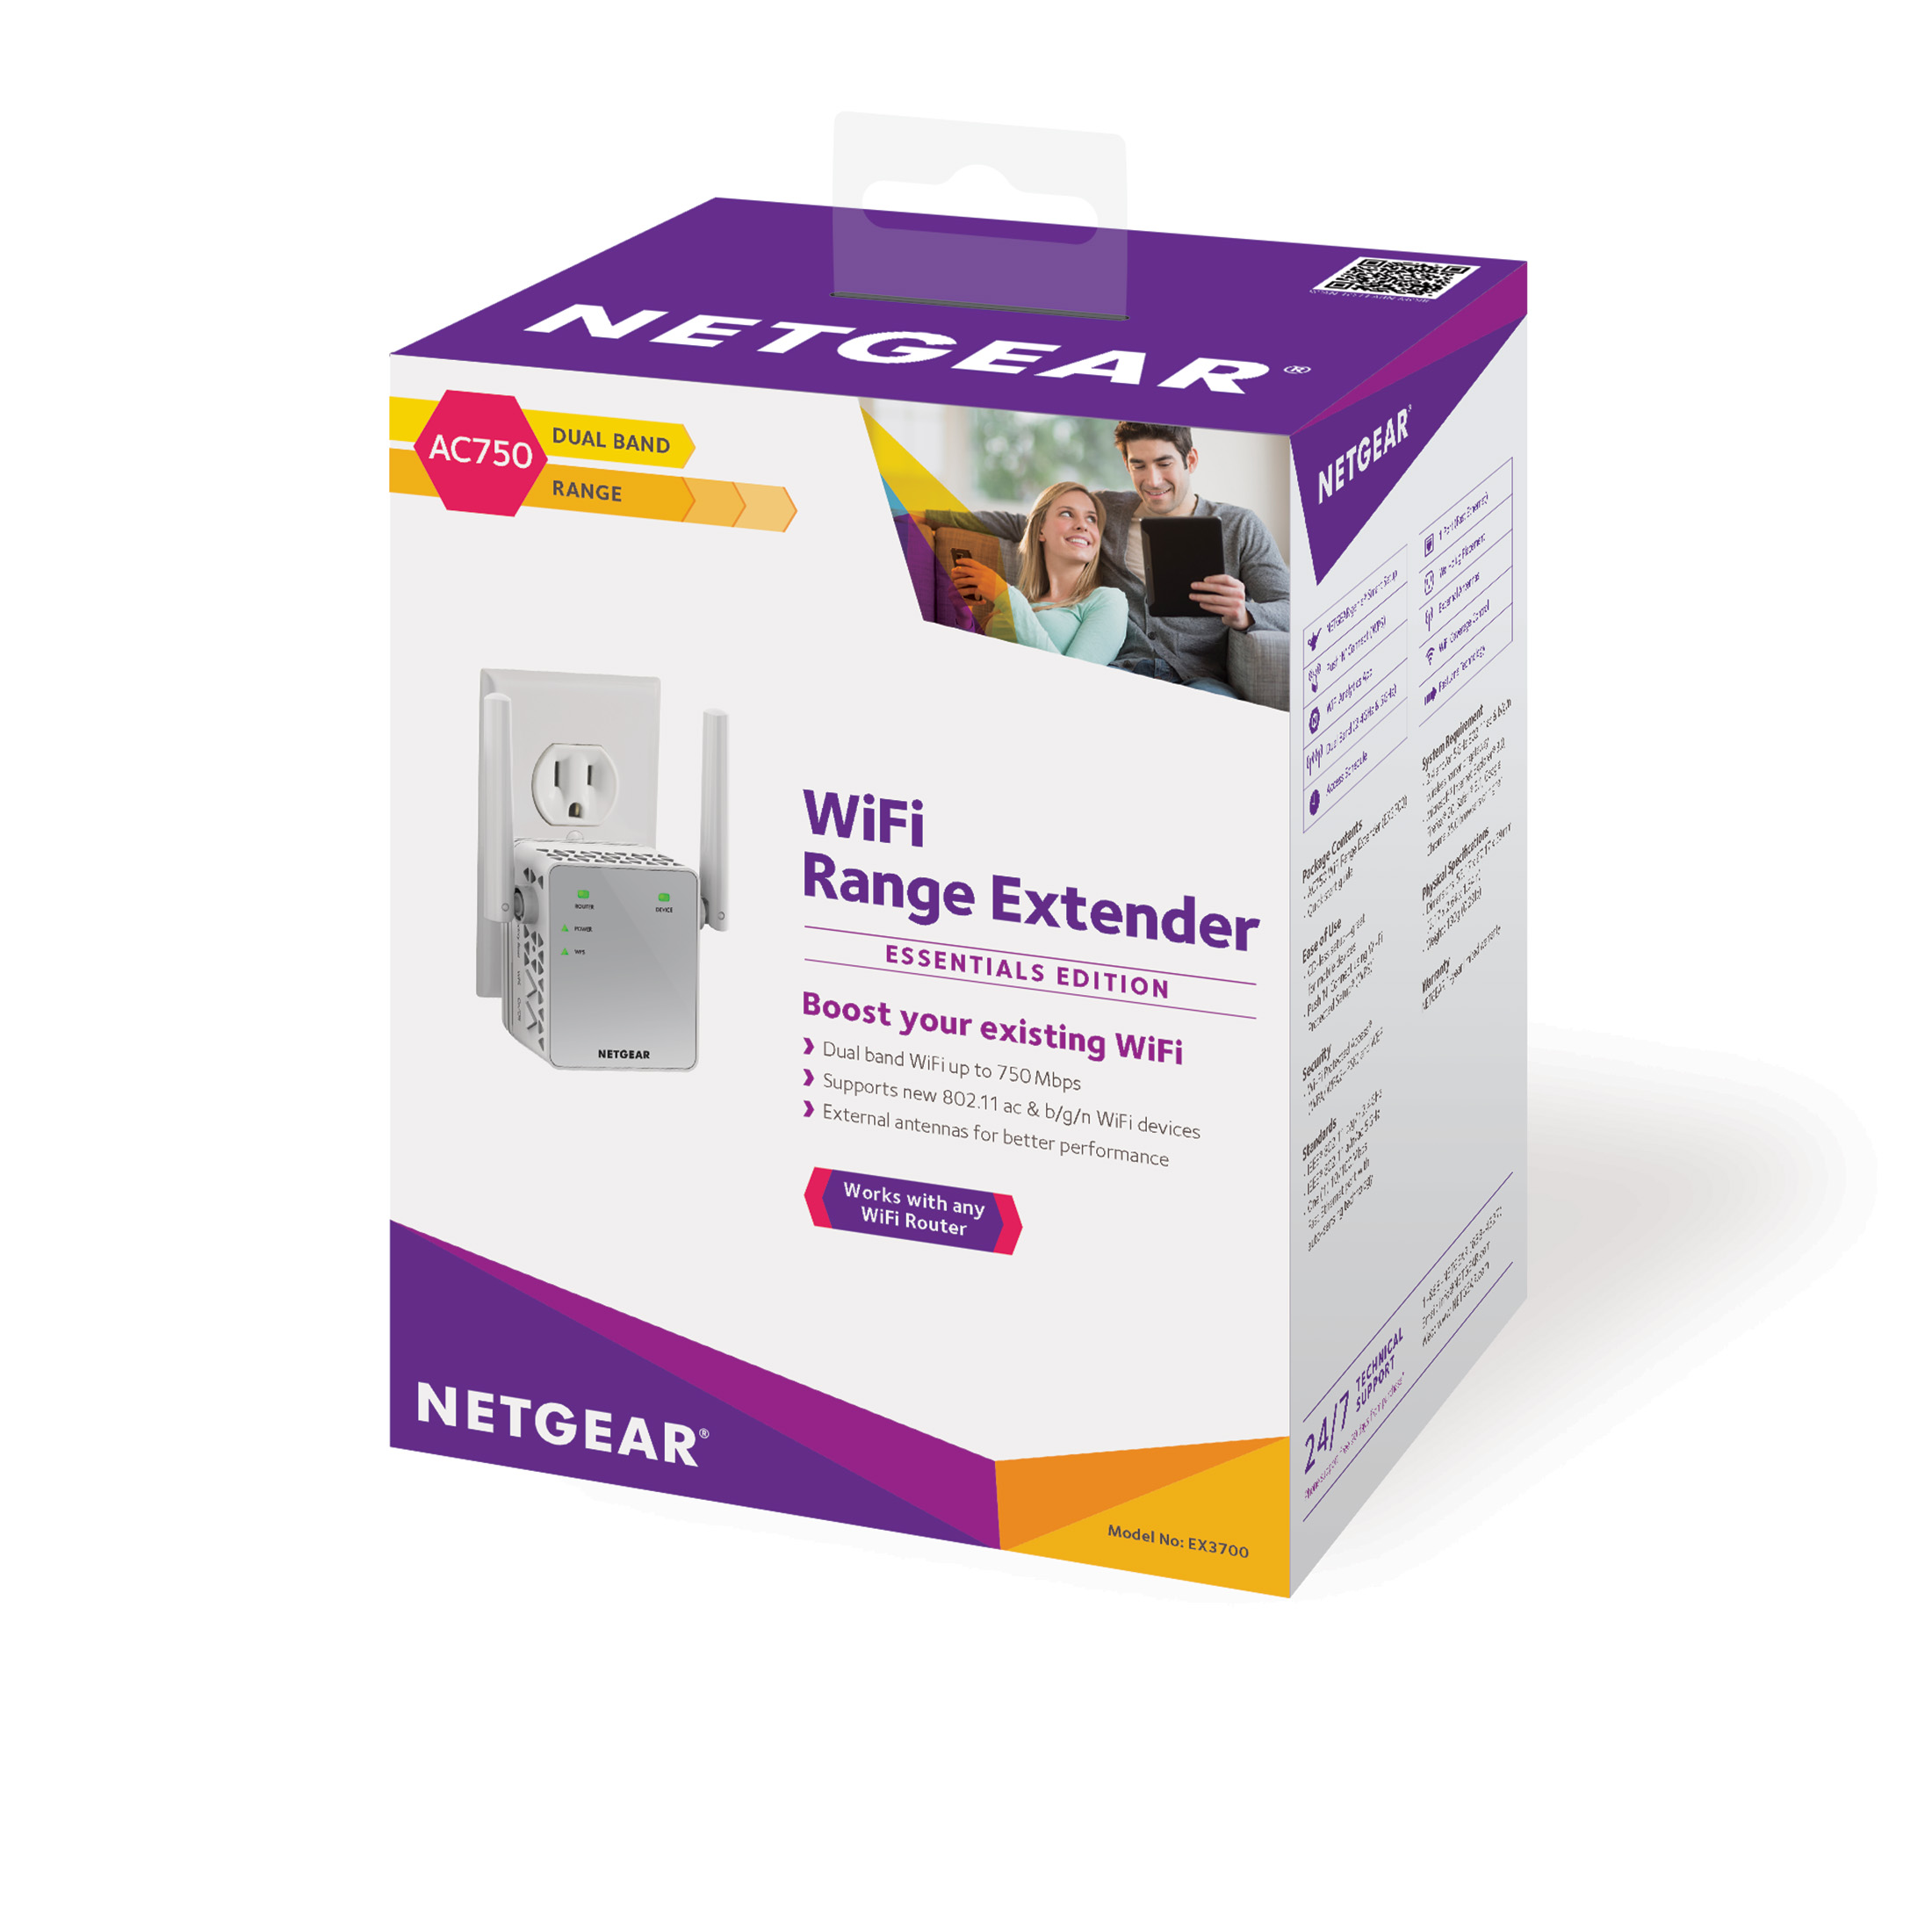 NETGEAR - AC750 WiFi Range Extender and Signal Booster, Wall-Plug, 750Mbps (EX3700) - image 7 of 7